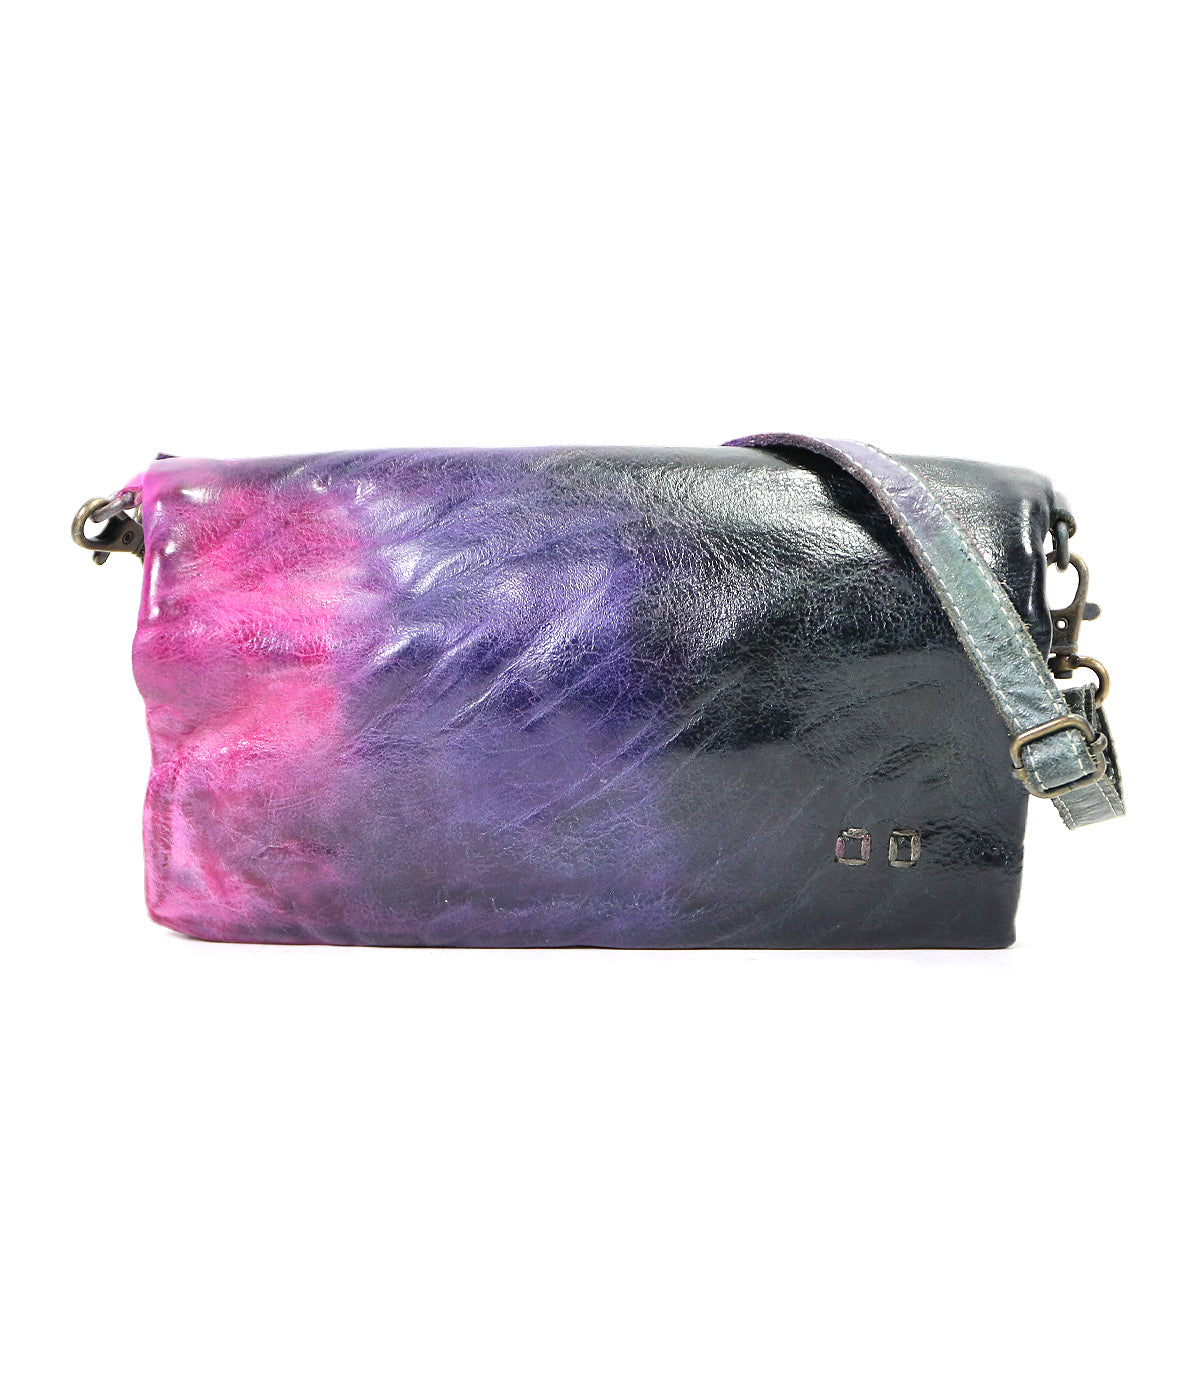 A colorful metallic Cadence crossbody clutch from Bed Stu with a gradient purple to pink pattern and a silver chain, isolated on a white background.